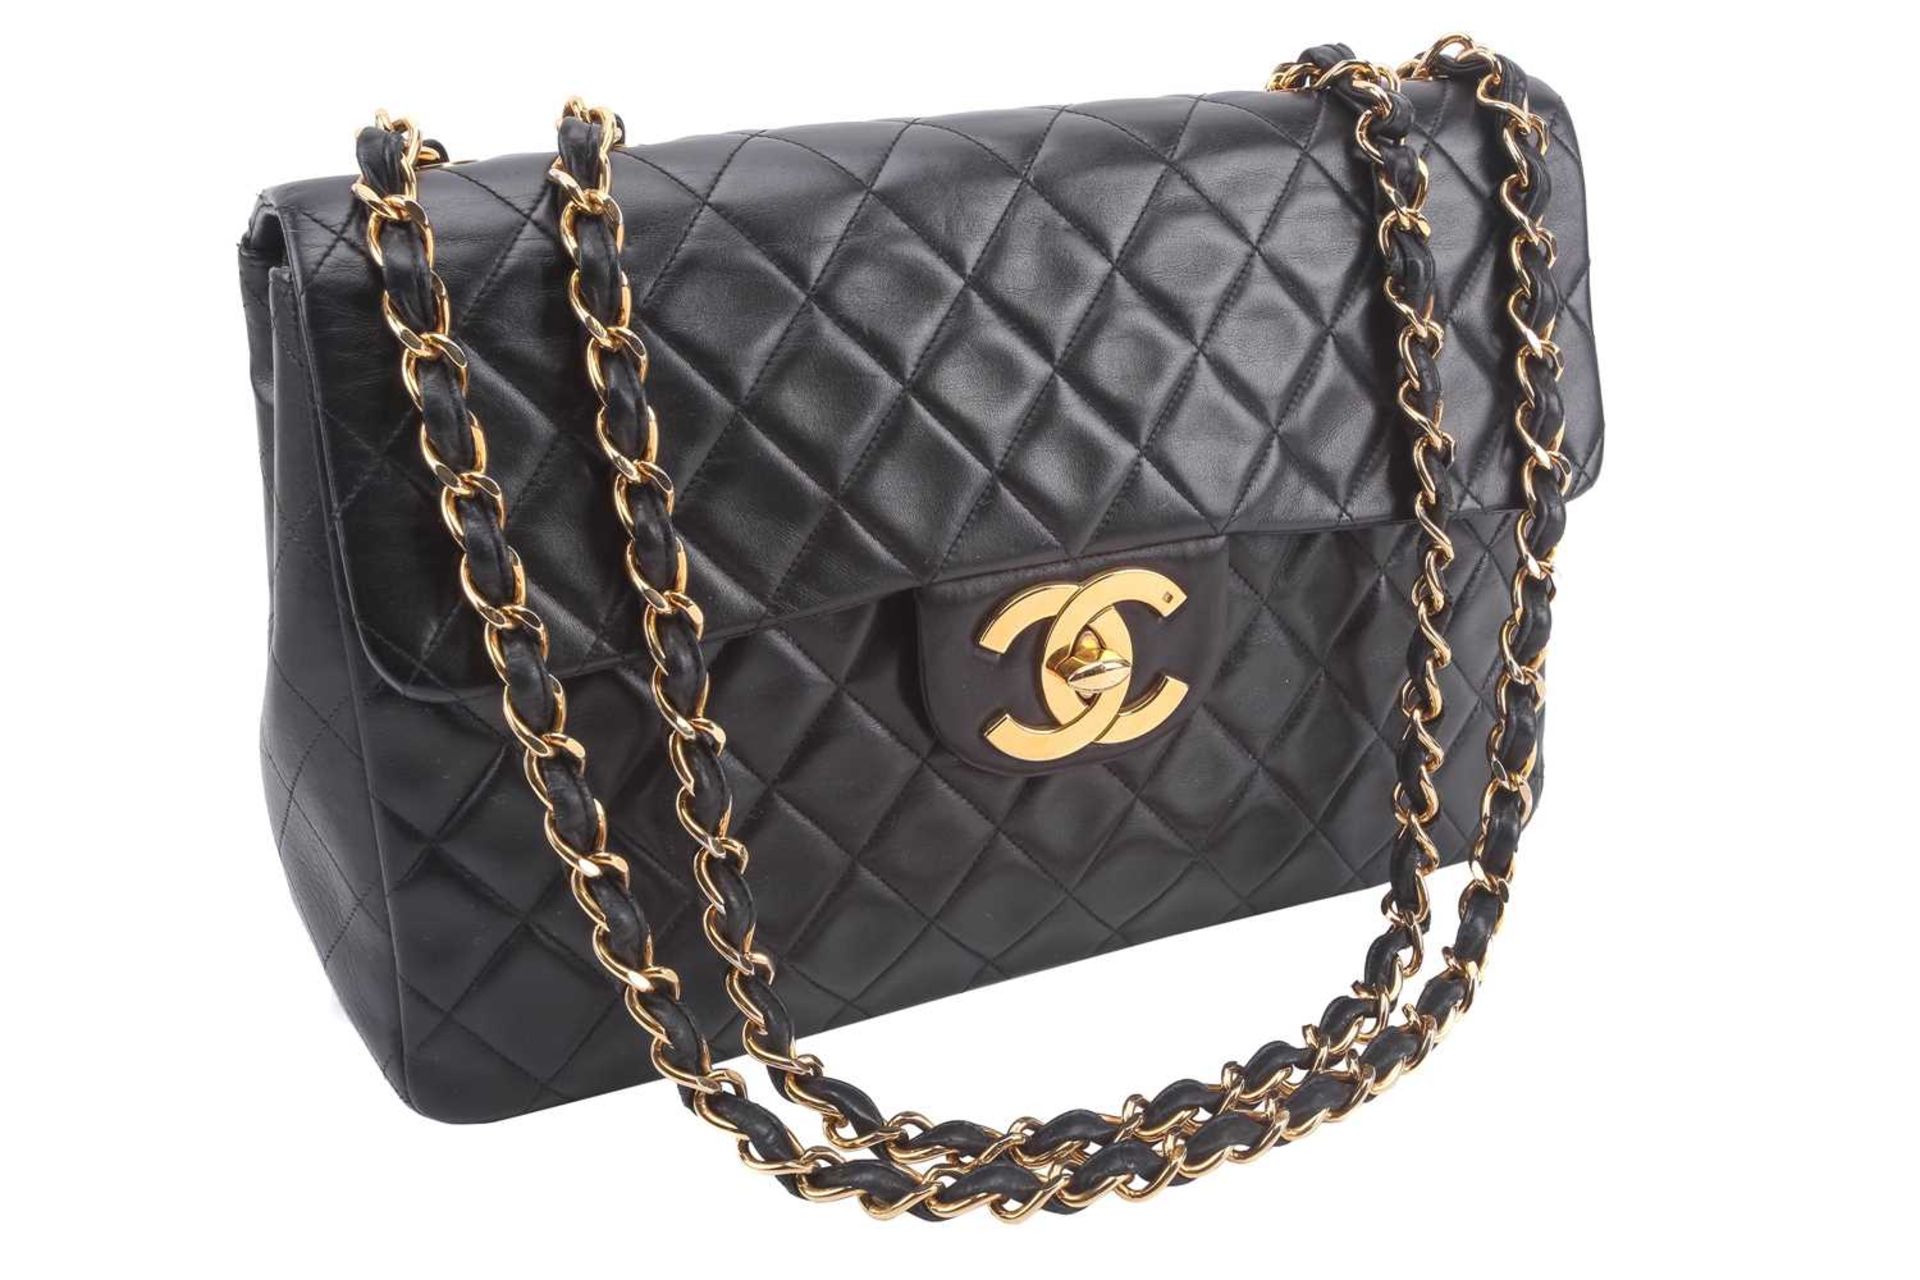 Chanel - a jumbo XL single flap bag in black diamond-quilted lambskin leather, circa 1991,